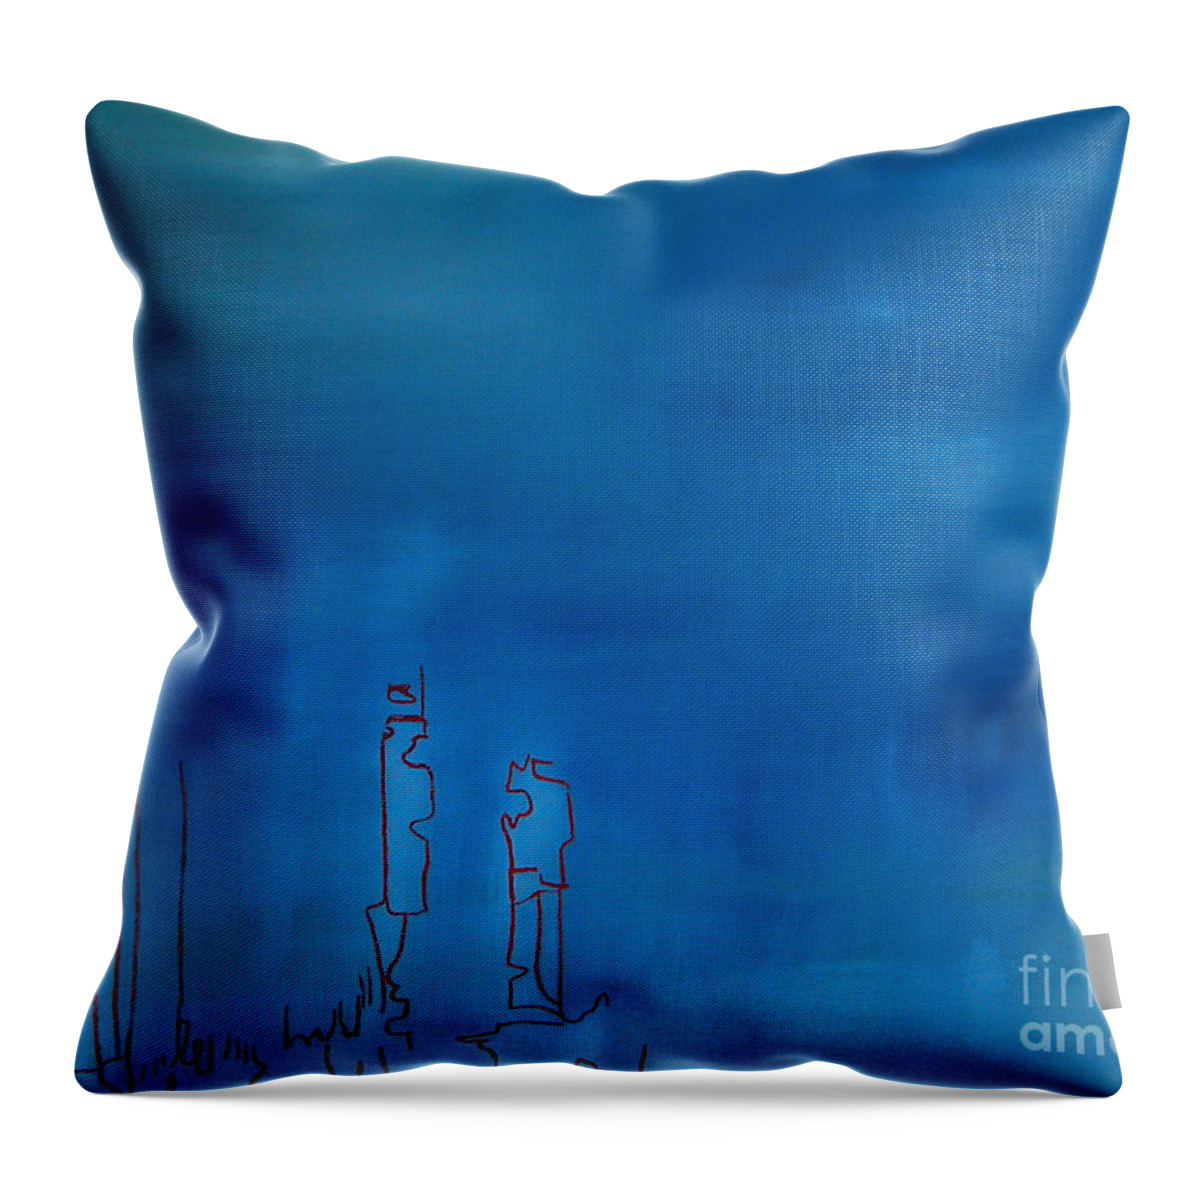 Blue Painting Throw Pillow featuring the painting Blue by Jeff Barrett